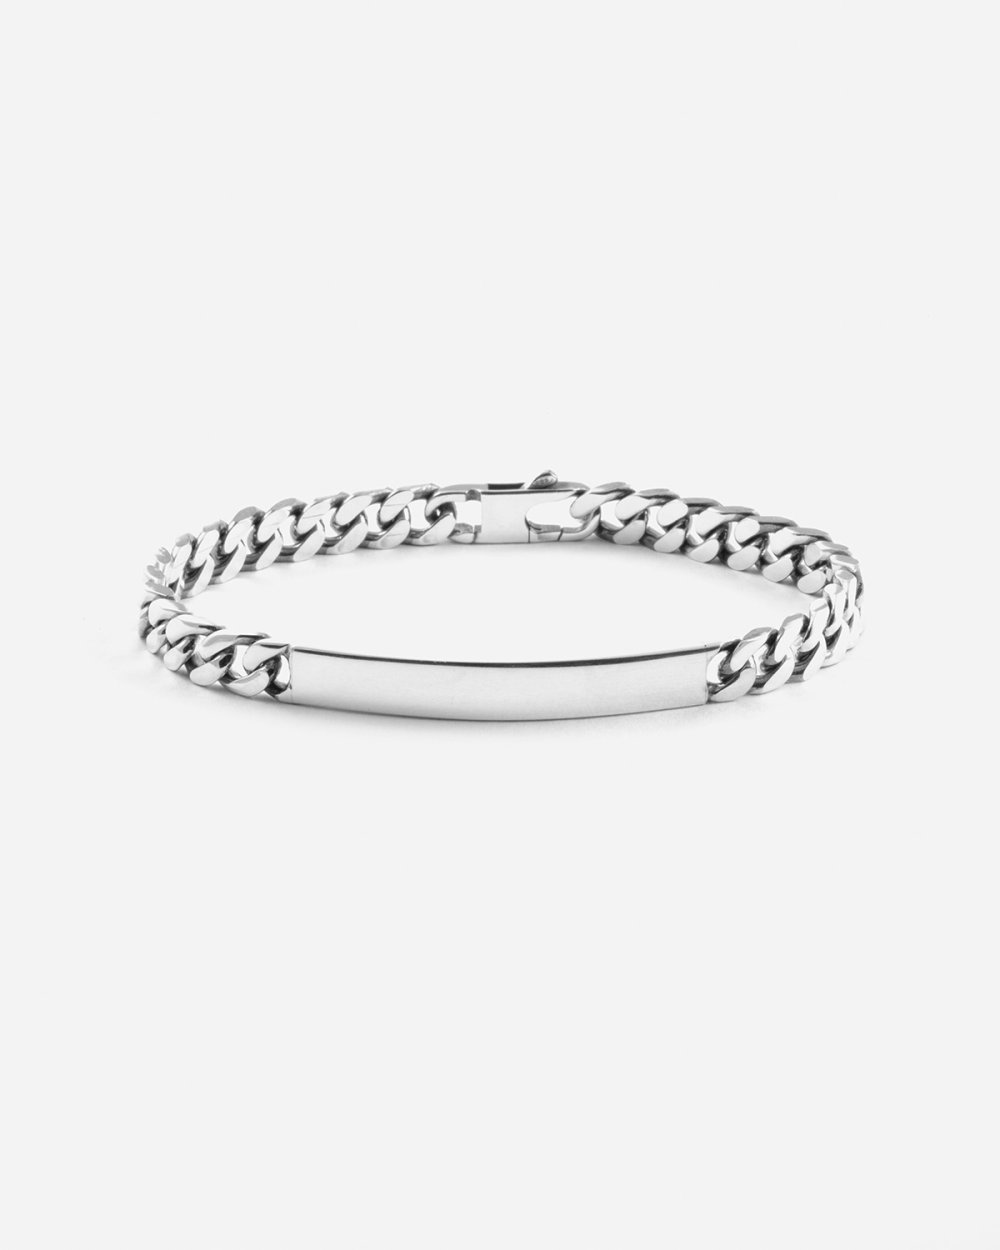 SQUARE CURB BRACELET 200 WITH PLATE